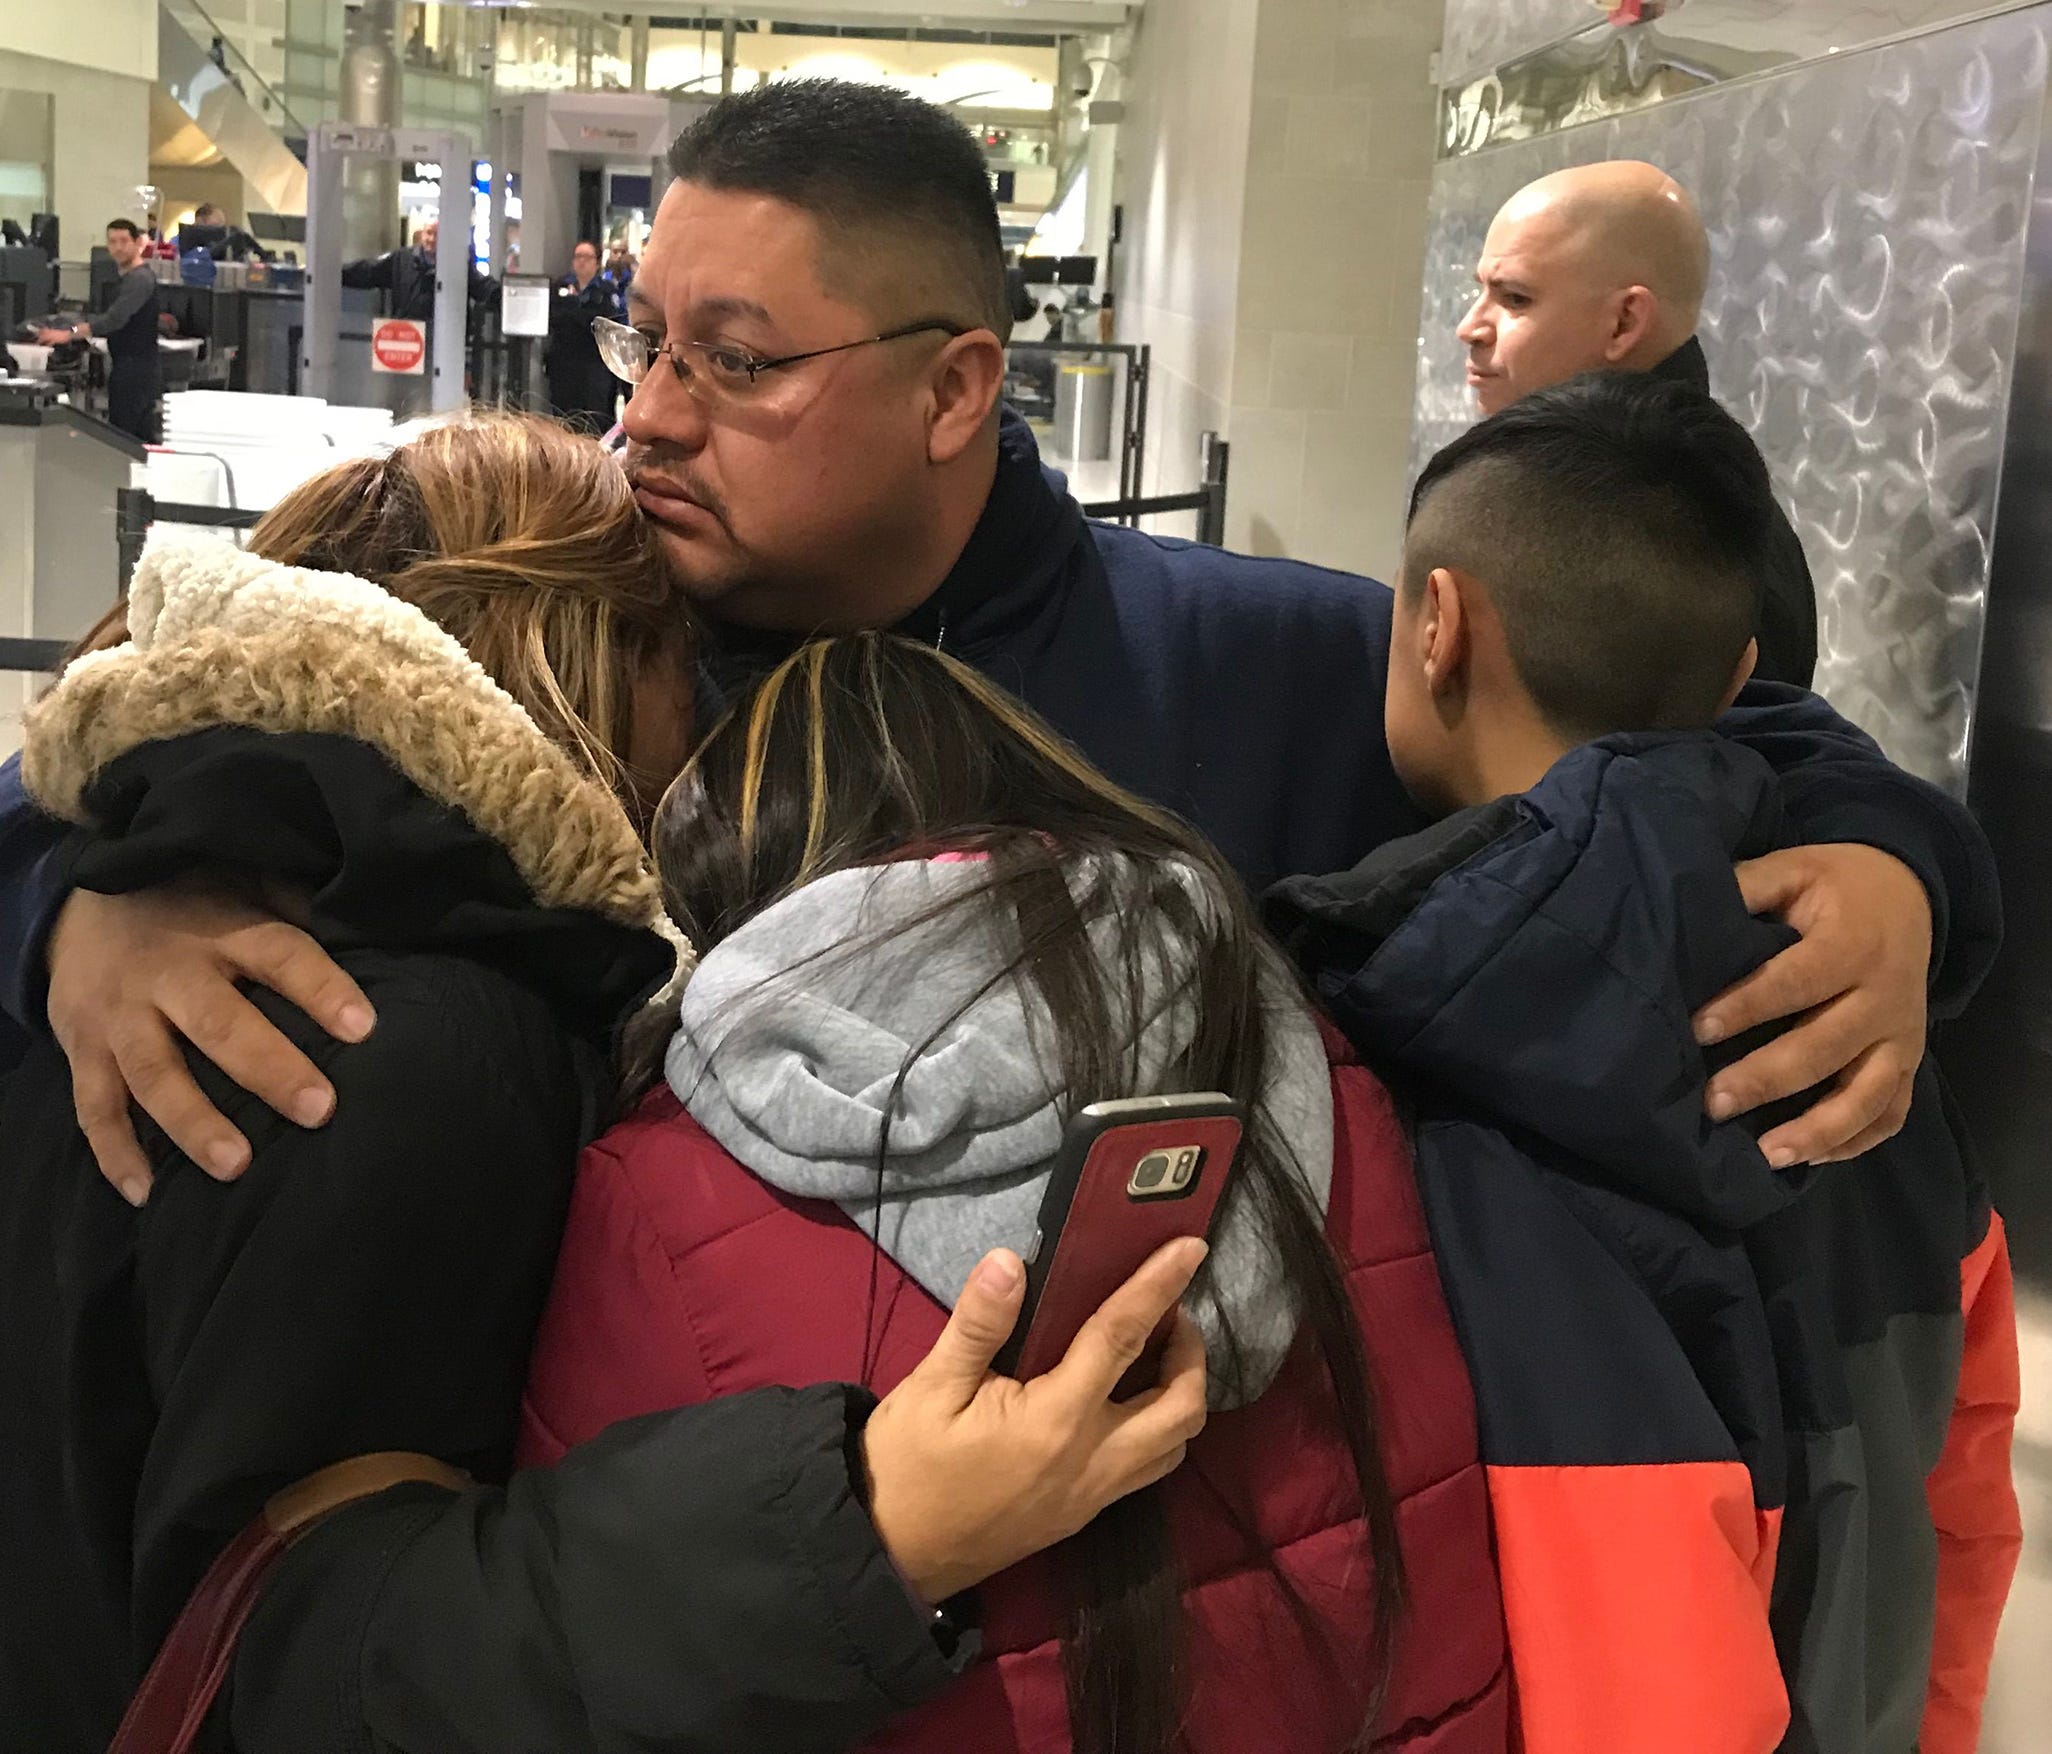 Jorge Garcia, 39, of Lincoln Park, Mich., hugs his wife, Cindy Garcia, and their two children Jan. 15, 2018, at Detroit Metro Airport moments before being forced to board a flight to Mexico to be deported.